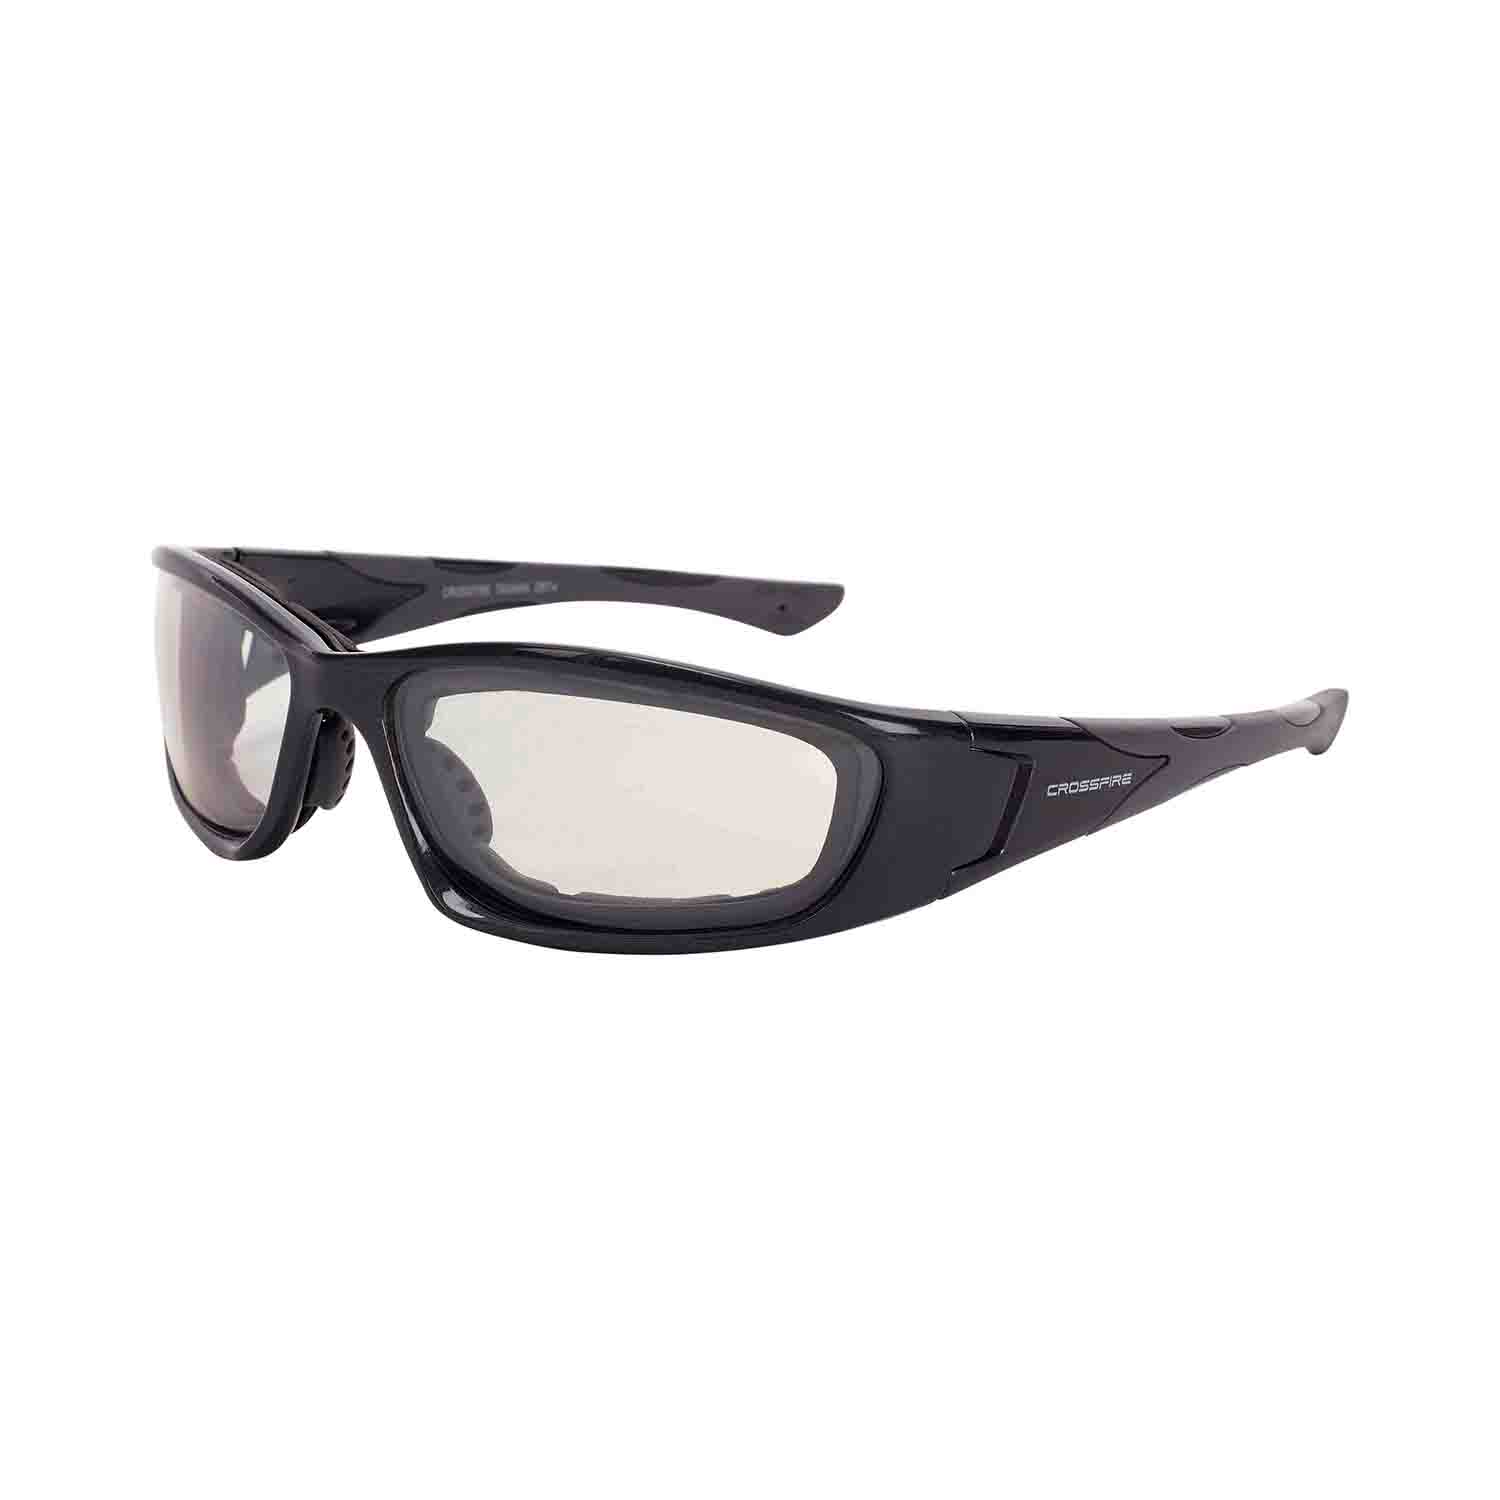 MP7 Foam Lined Safety Eyewear - Shiny Pearl Gray Frame - Indoor/Outdoor Anti-Fog Lens